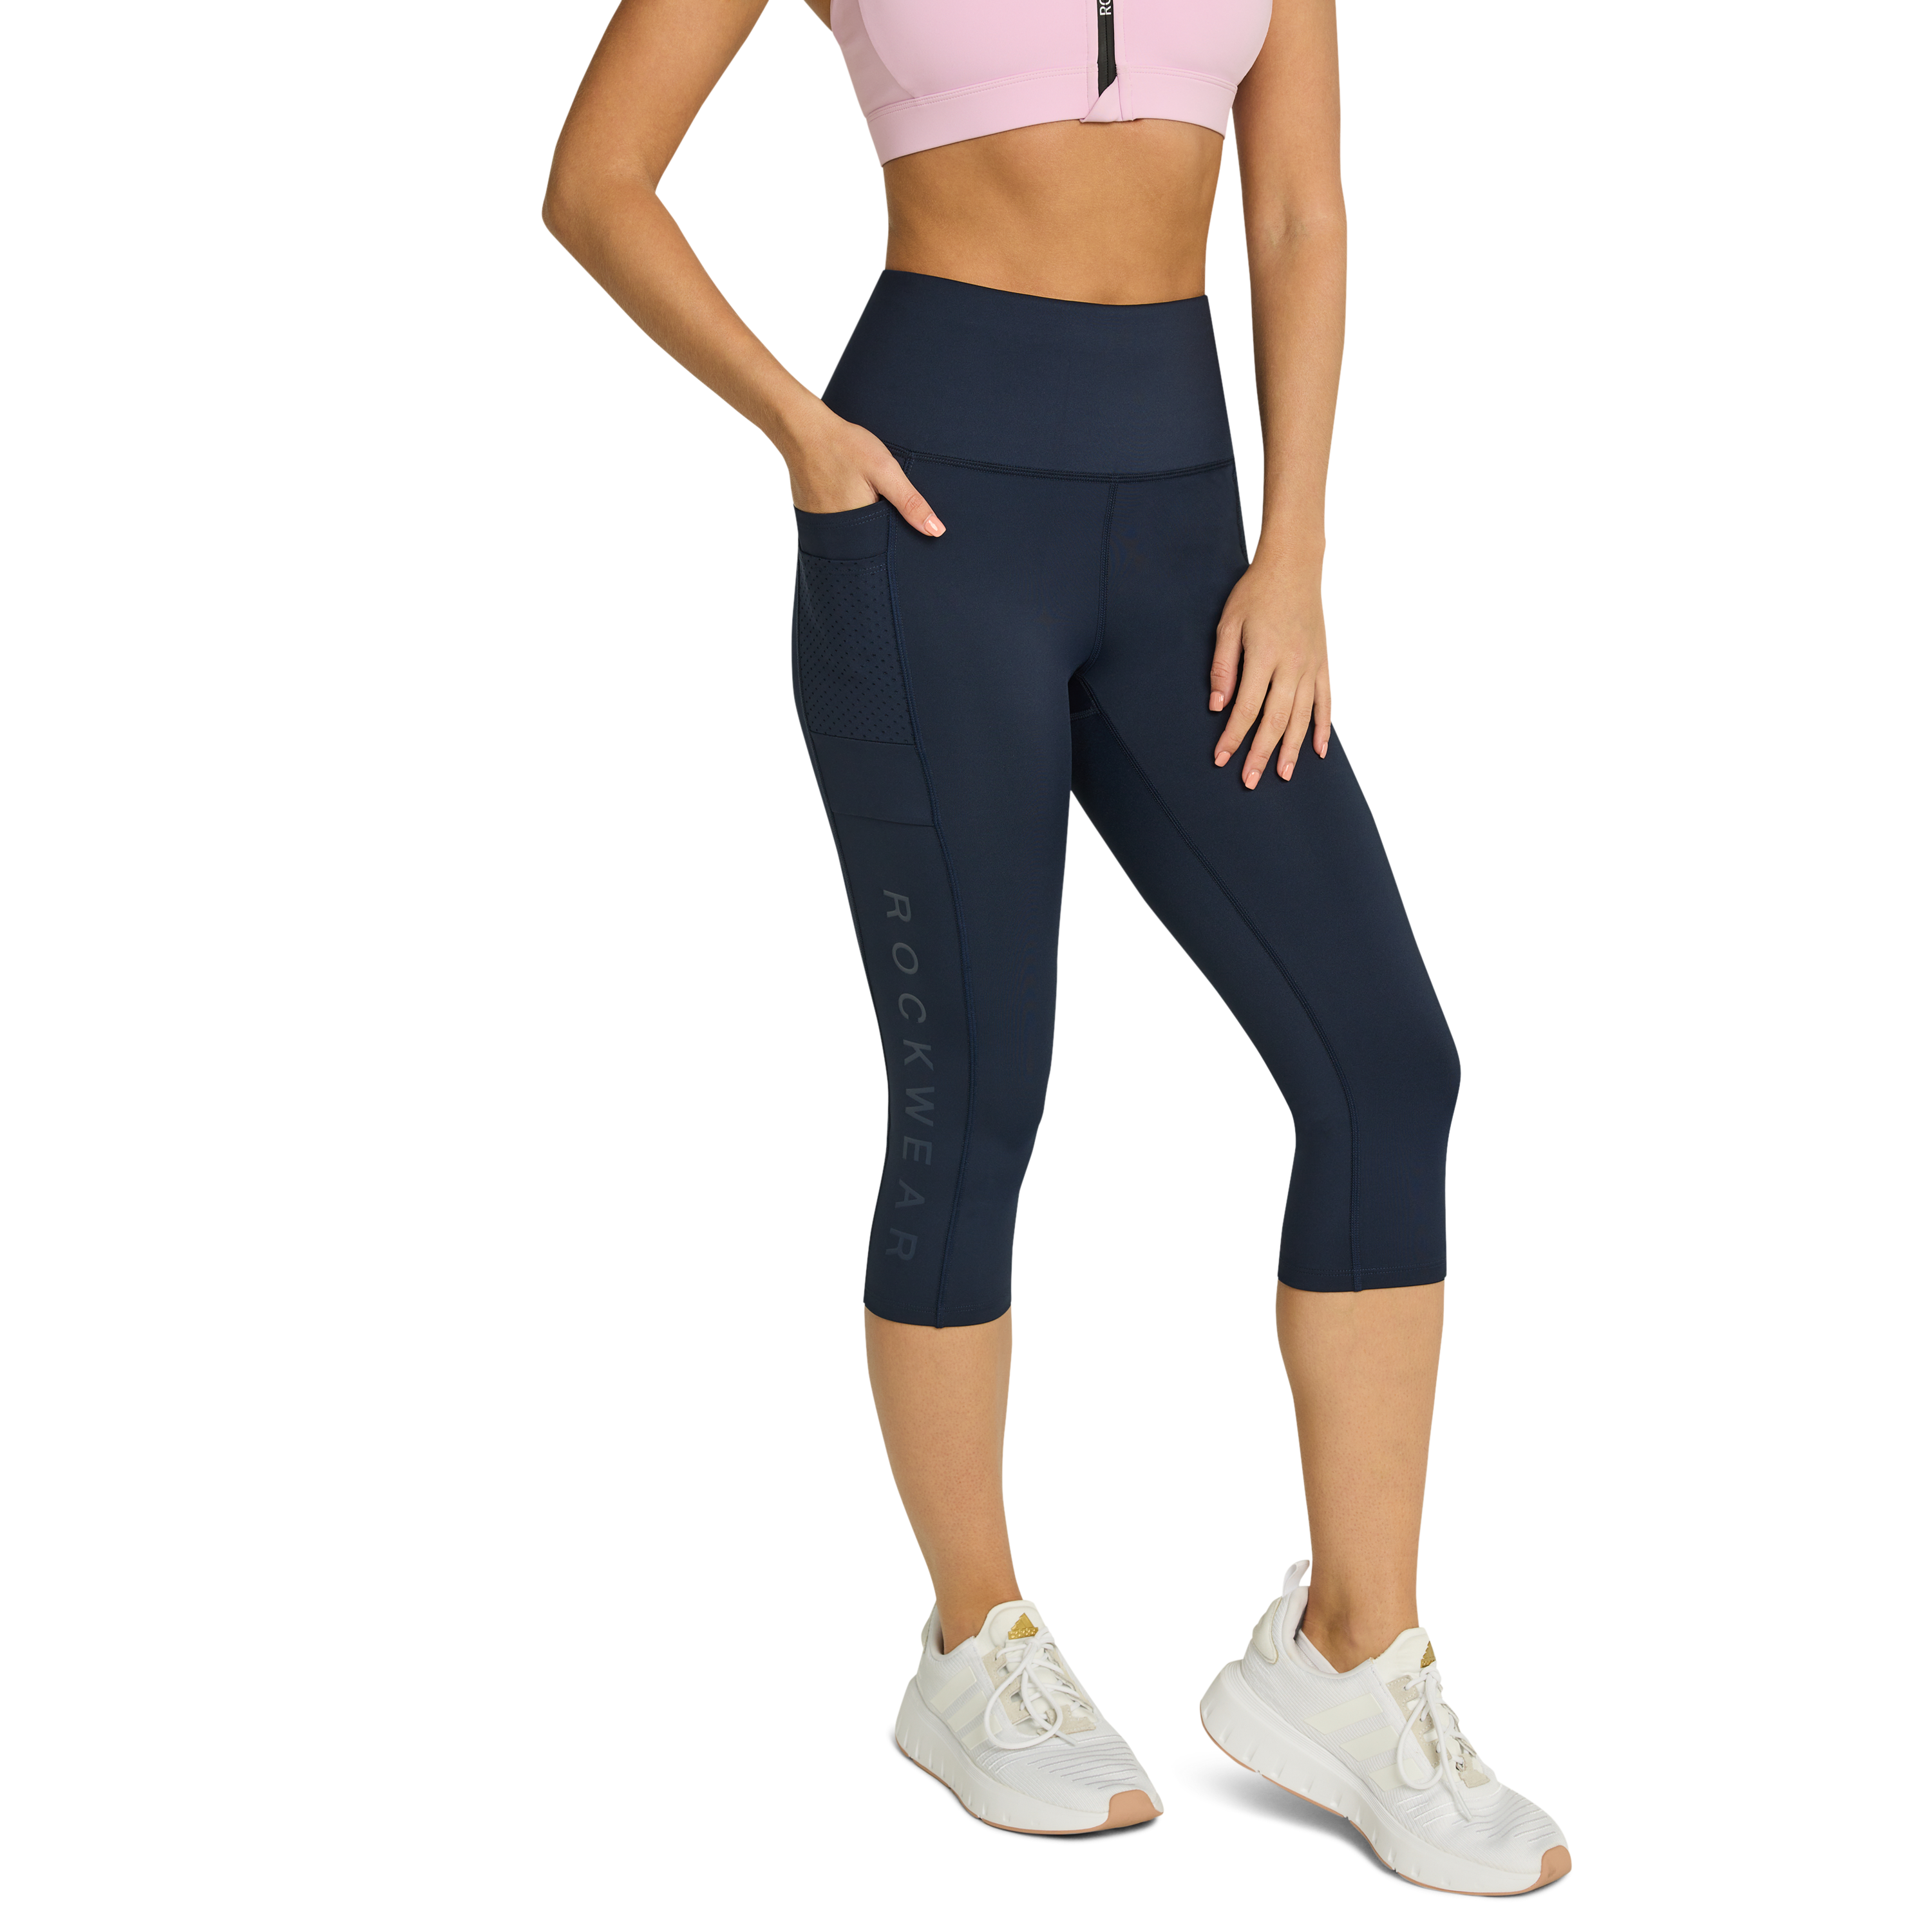 Buy aastey Uplift Active Wear Leggings for Women | Workout Leggings with  Pockets | High Waisted, Non Transparent & Ankle Length (Betty Blue, XXS) at  Amazon.in